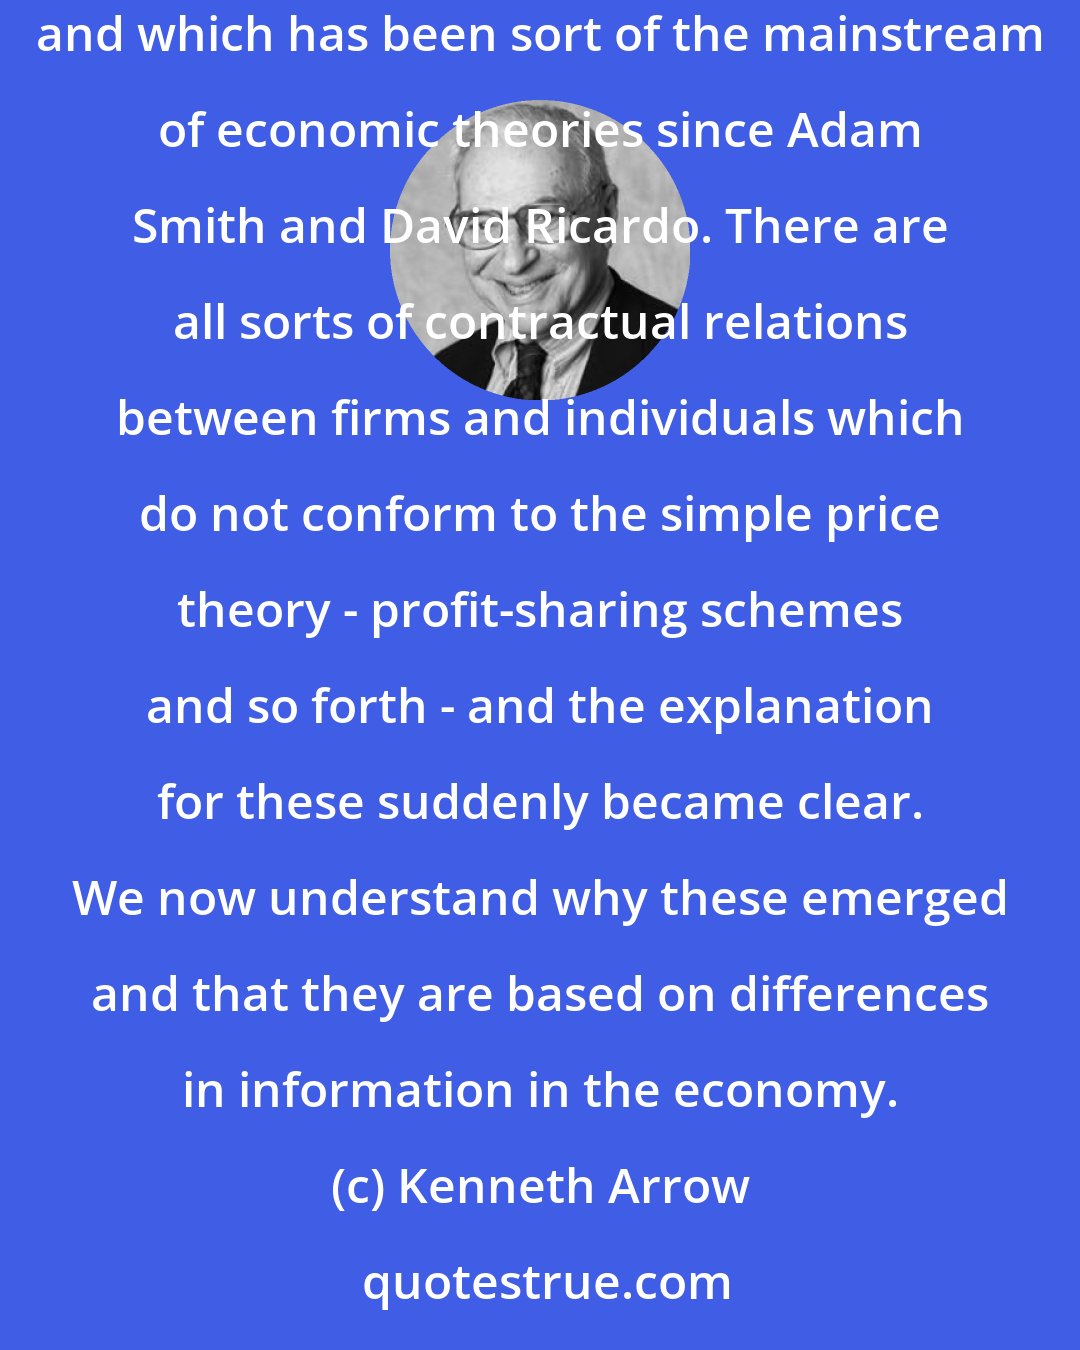 Kenneth Arrow: There are all sorts of institutions in the economic world which depart from the simple price/market model which I worked on in an earlier incarnation and which has been sort of the mainstream of economic theories since Adam Smith and David Ricardo. There are all sorts of contractual relations between firms and individuals which do not conform to the simple price theory - profit-sharing schemes and so forth - and the explanation for these suddenly became clear. We now understand why these emerged and that they are based on differences in information in the economy.